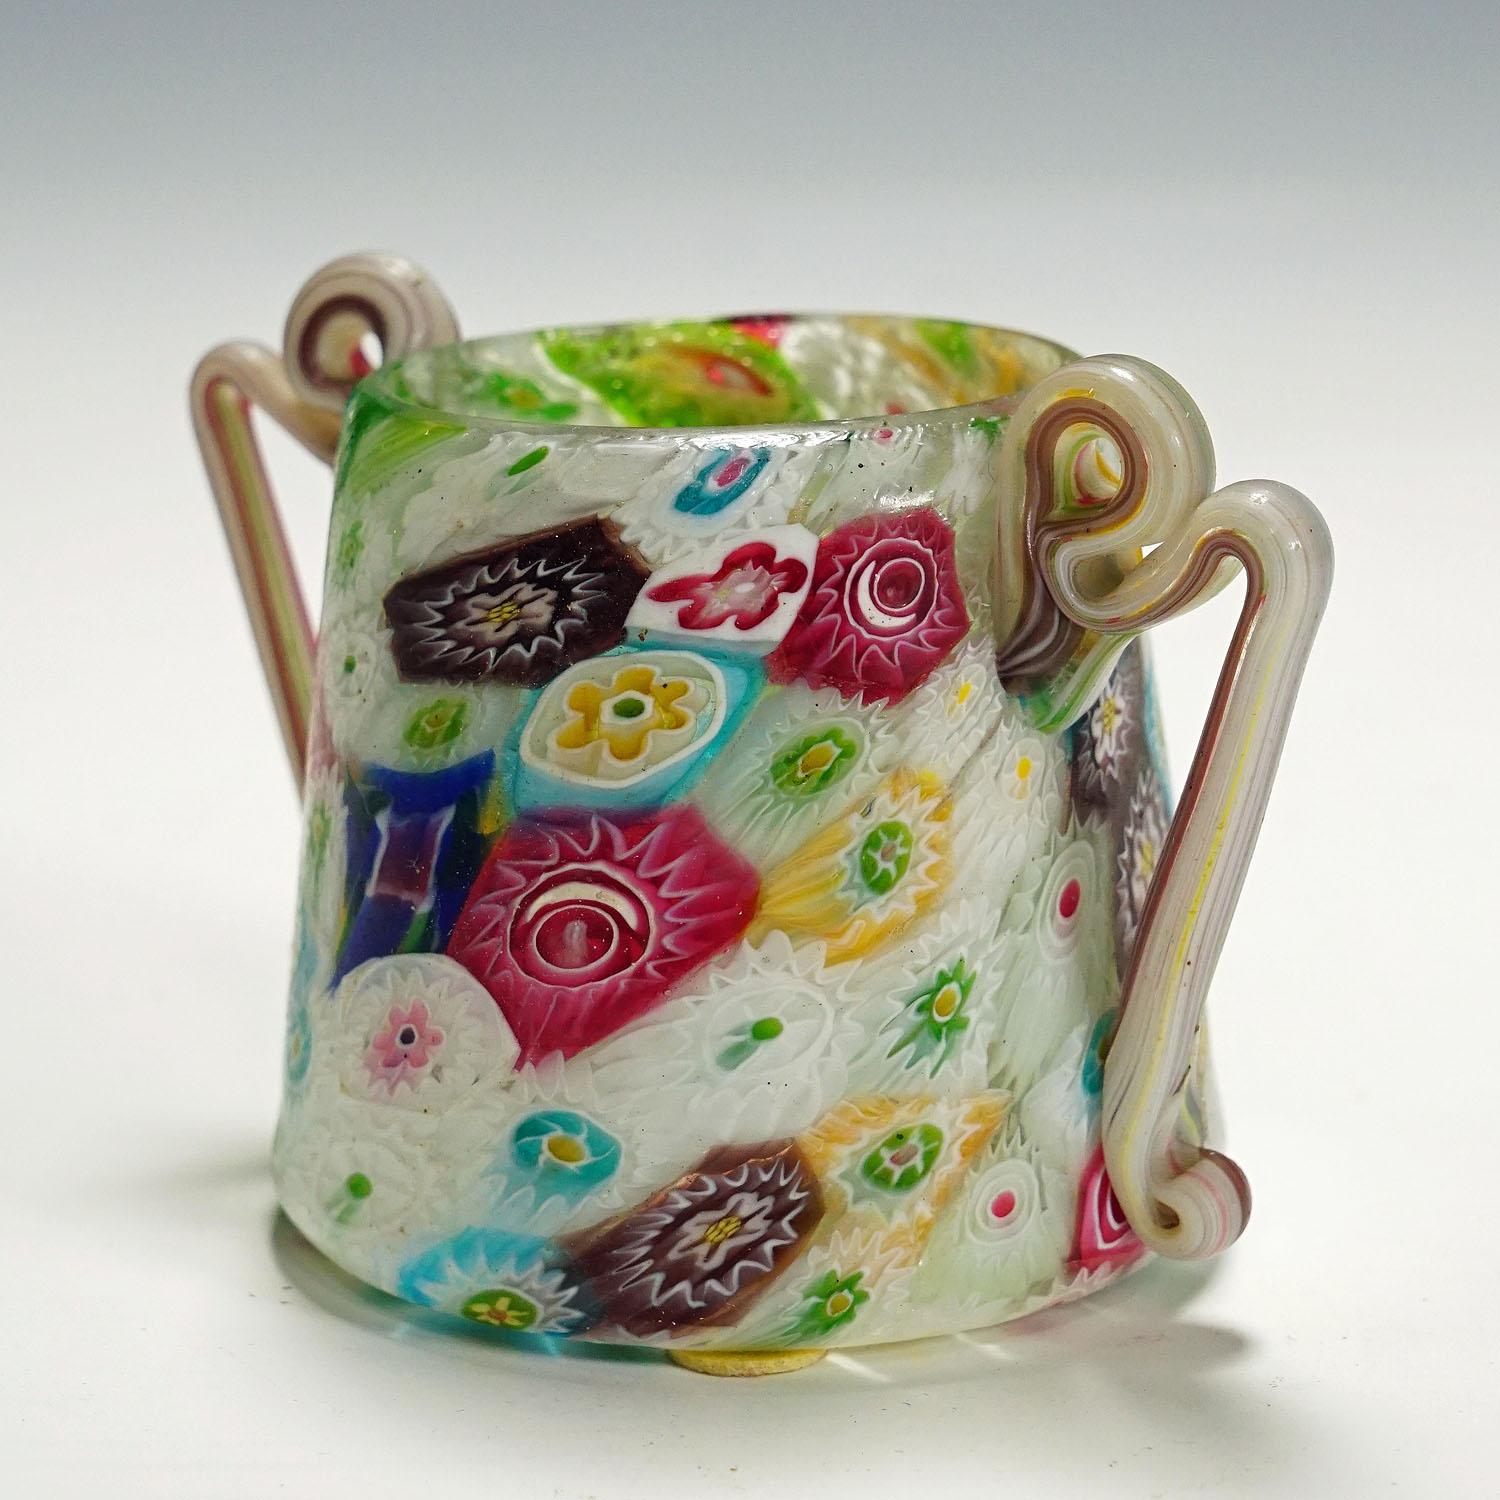 20th Century Antique Millefiori Goblet with Handles by Fratelli Toso, Murano circa 1910